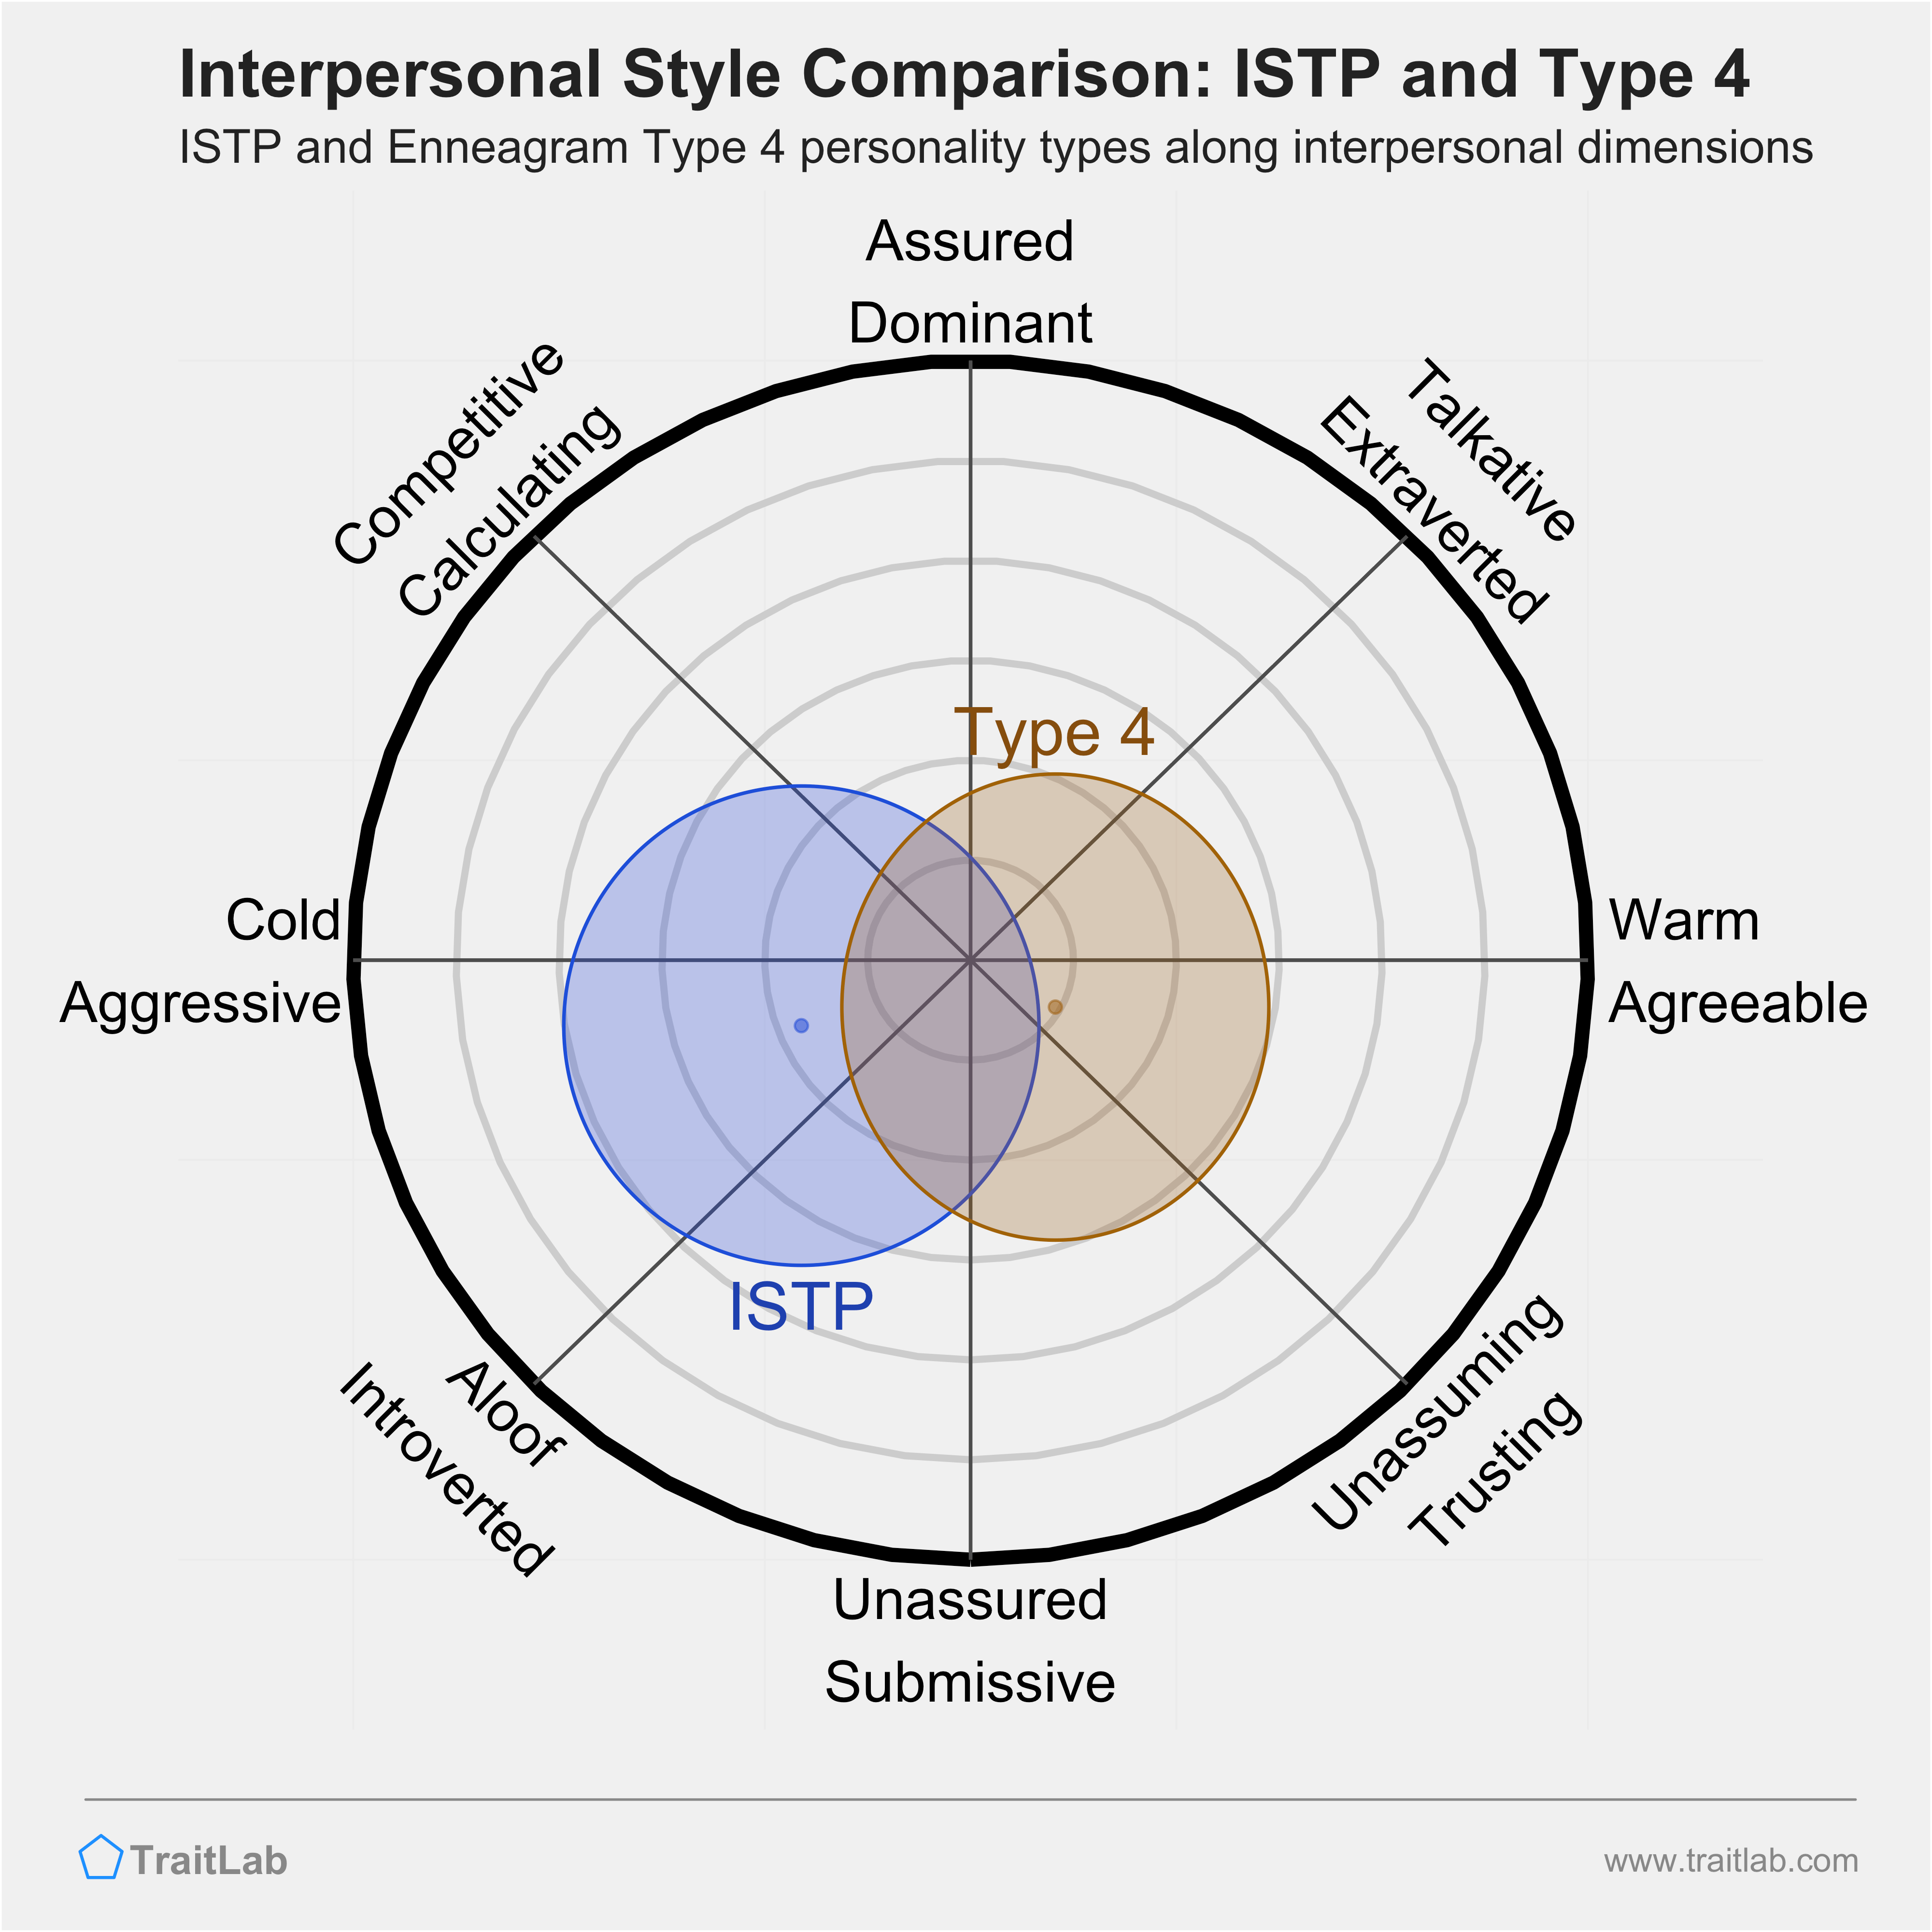 Enneagram ISTP and Type 4 comparison across interpersonal dimensions